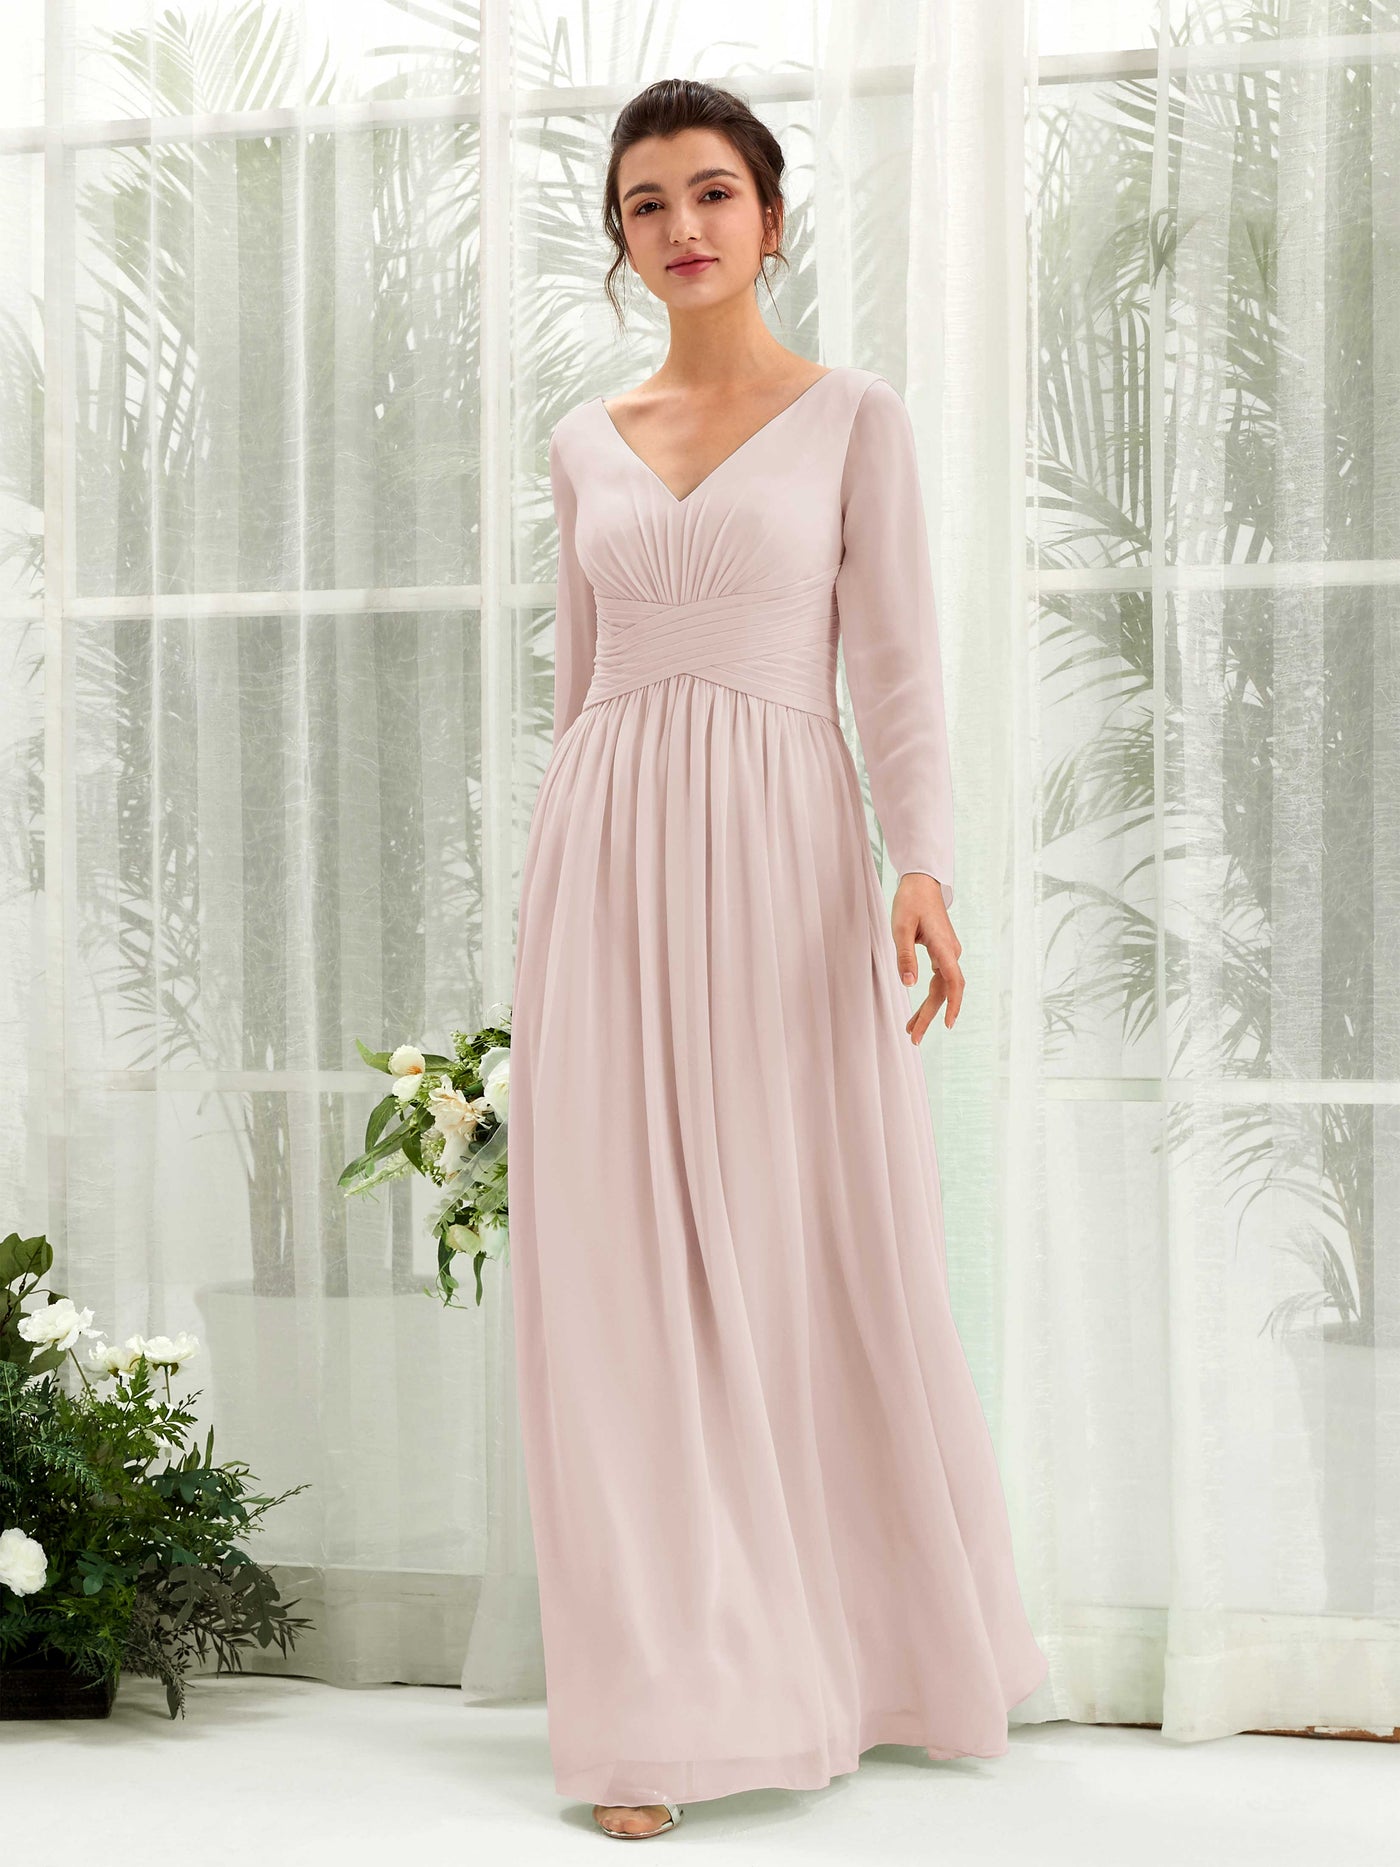 Biscotti Bridesmaid Dresses Bridesmaid Dress A-line Chiffon V-neck Full Length Long Sleeves Wedding Party Dress (81220335)#color_biscotti